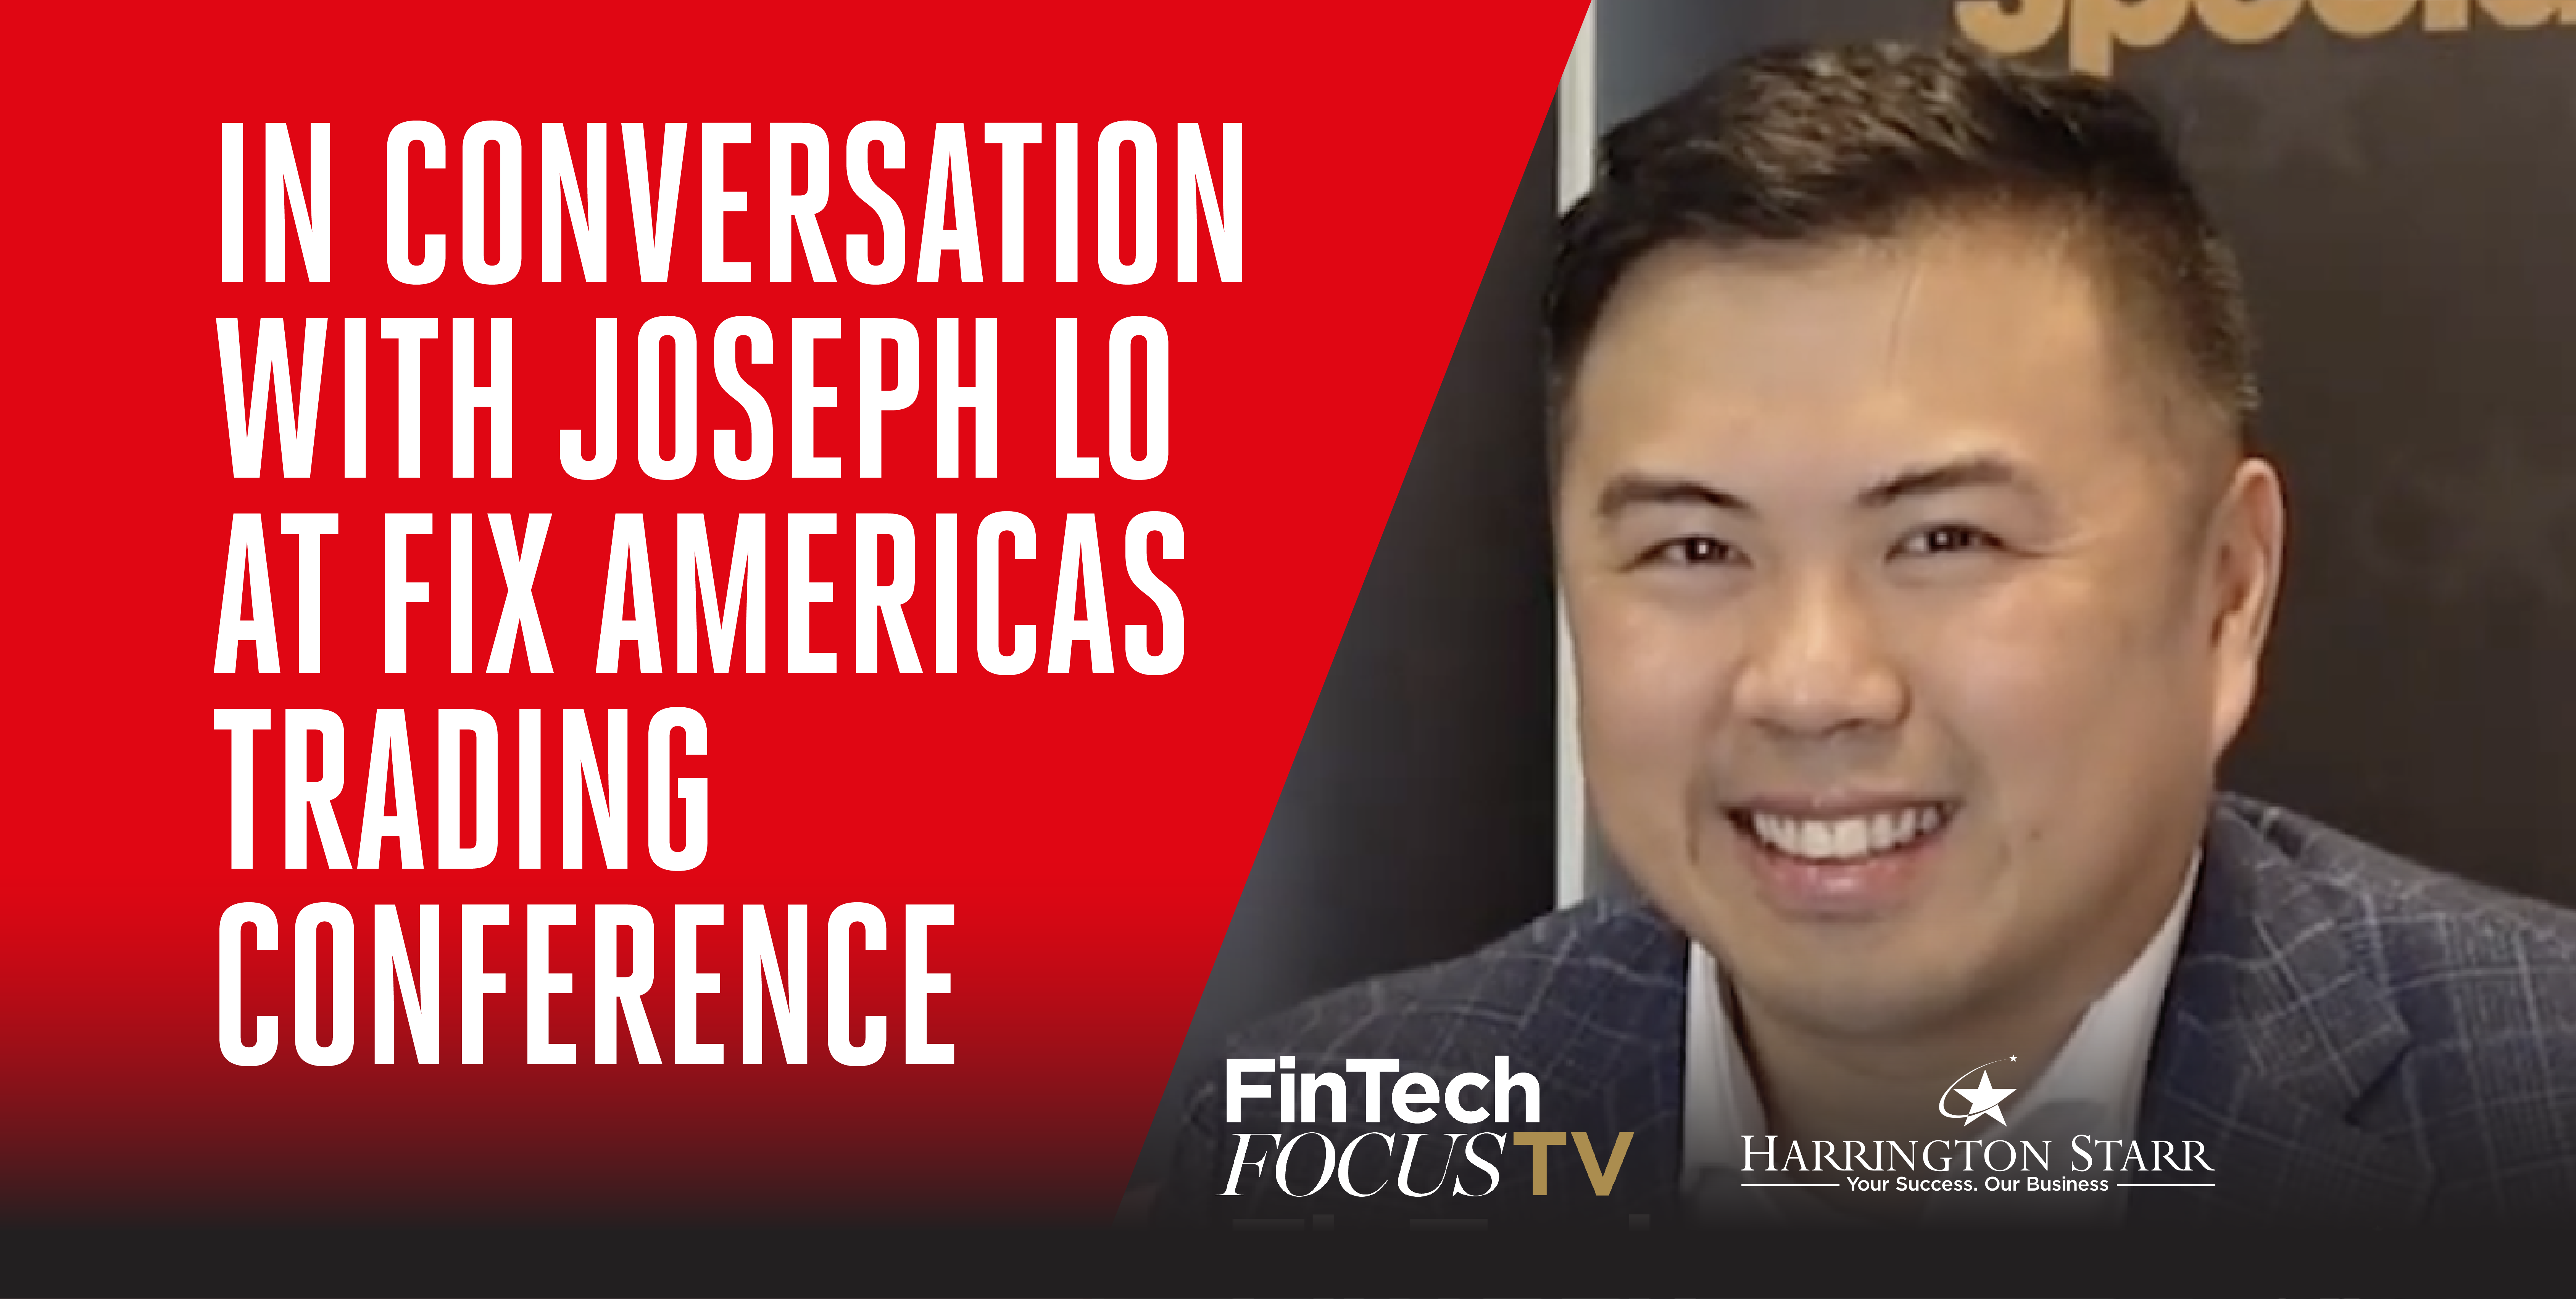 In Conversation with Joseph Lo at FIX Americas Trading Conference